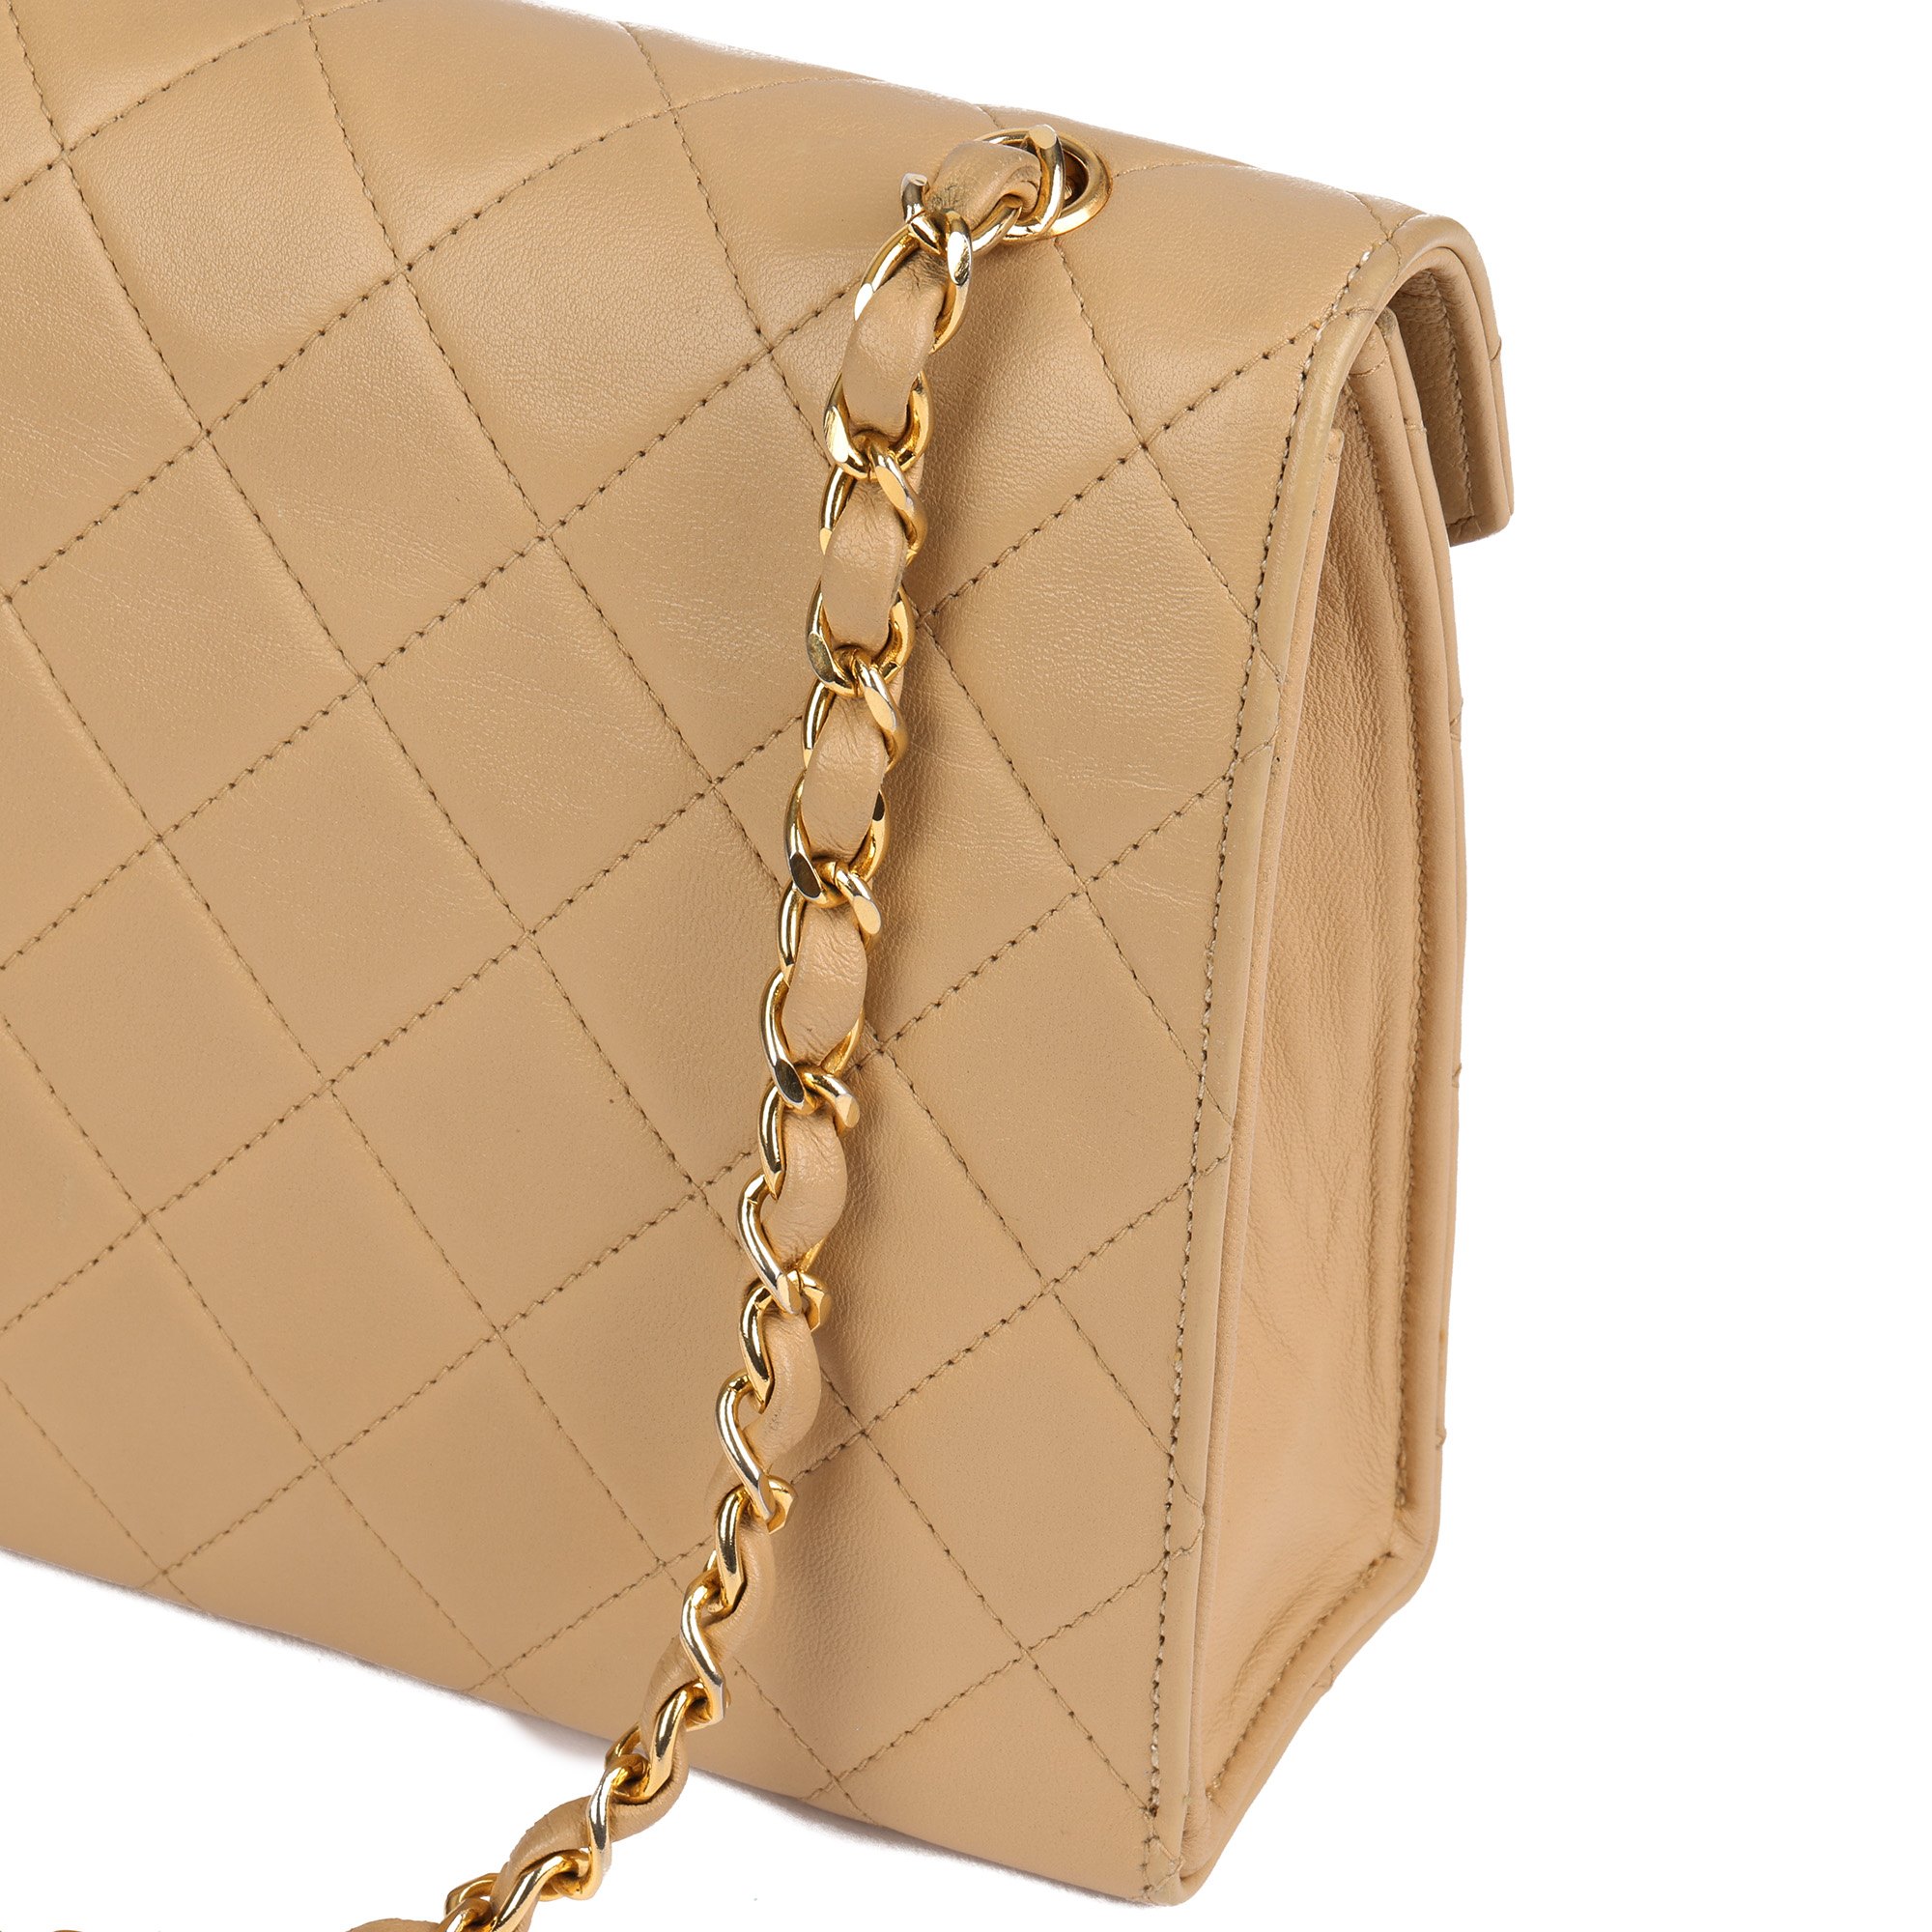 Chanel Beige Quilted Lambskin Vintage Mini Classic Single Flap Bag